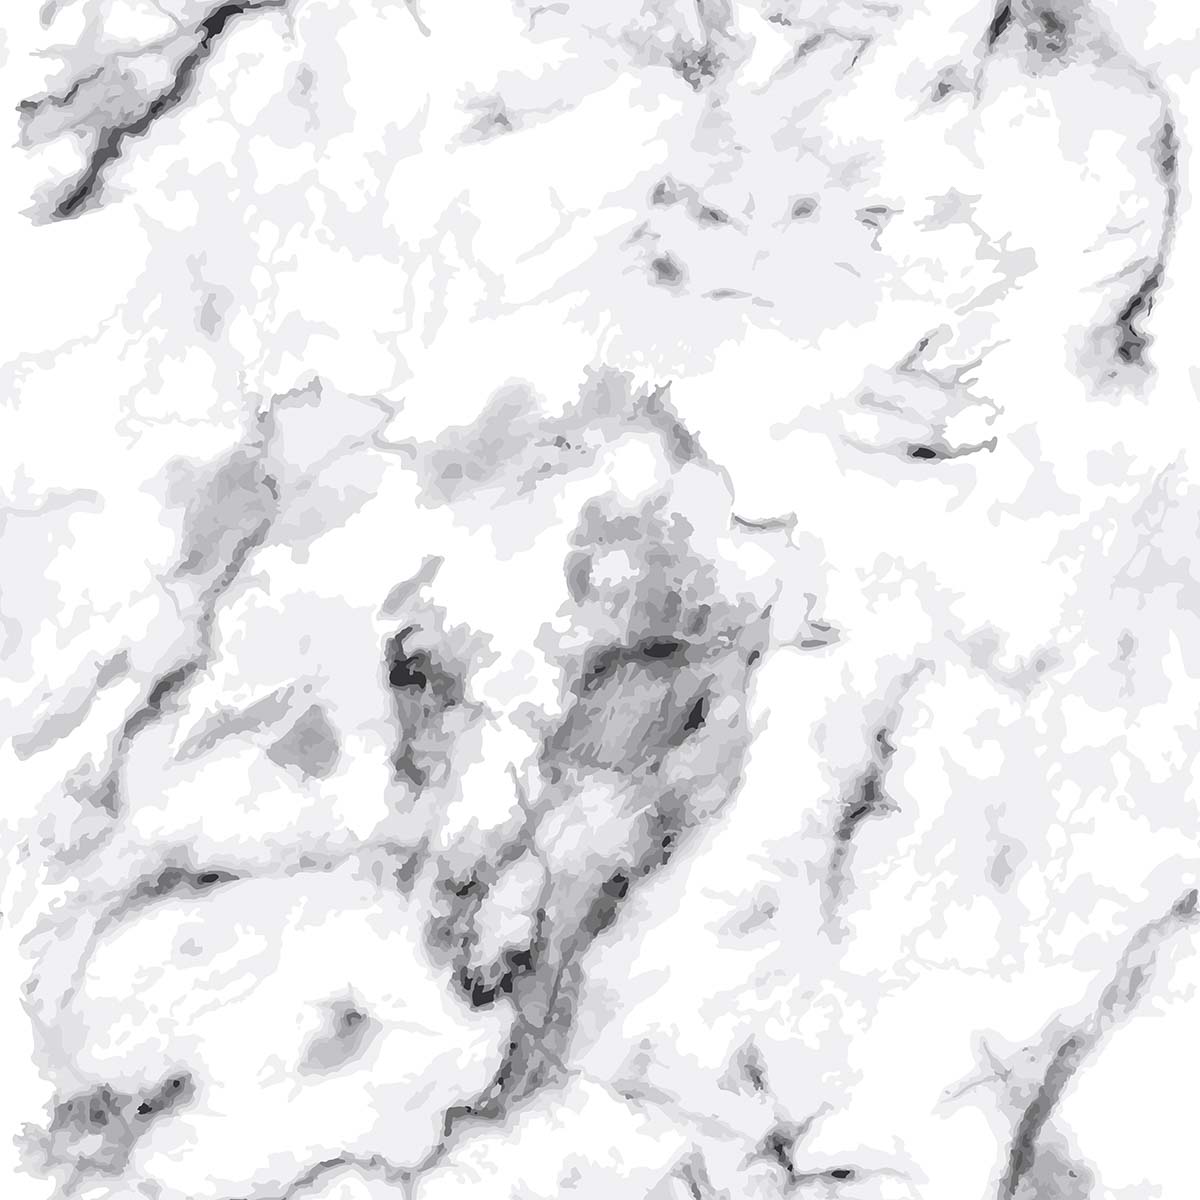 A close up of a marble